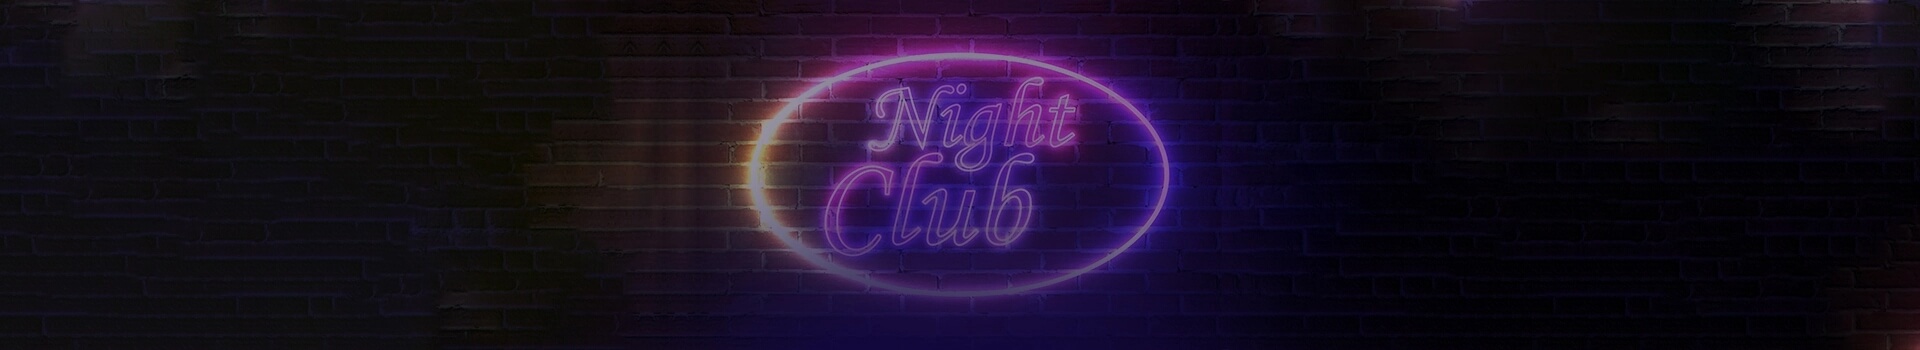 event neon signs banner